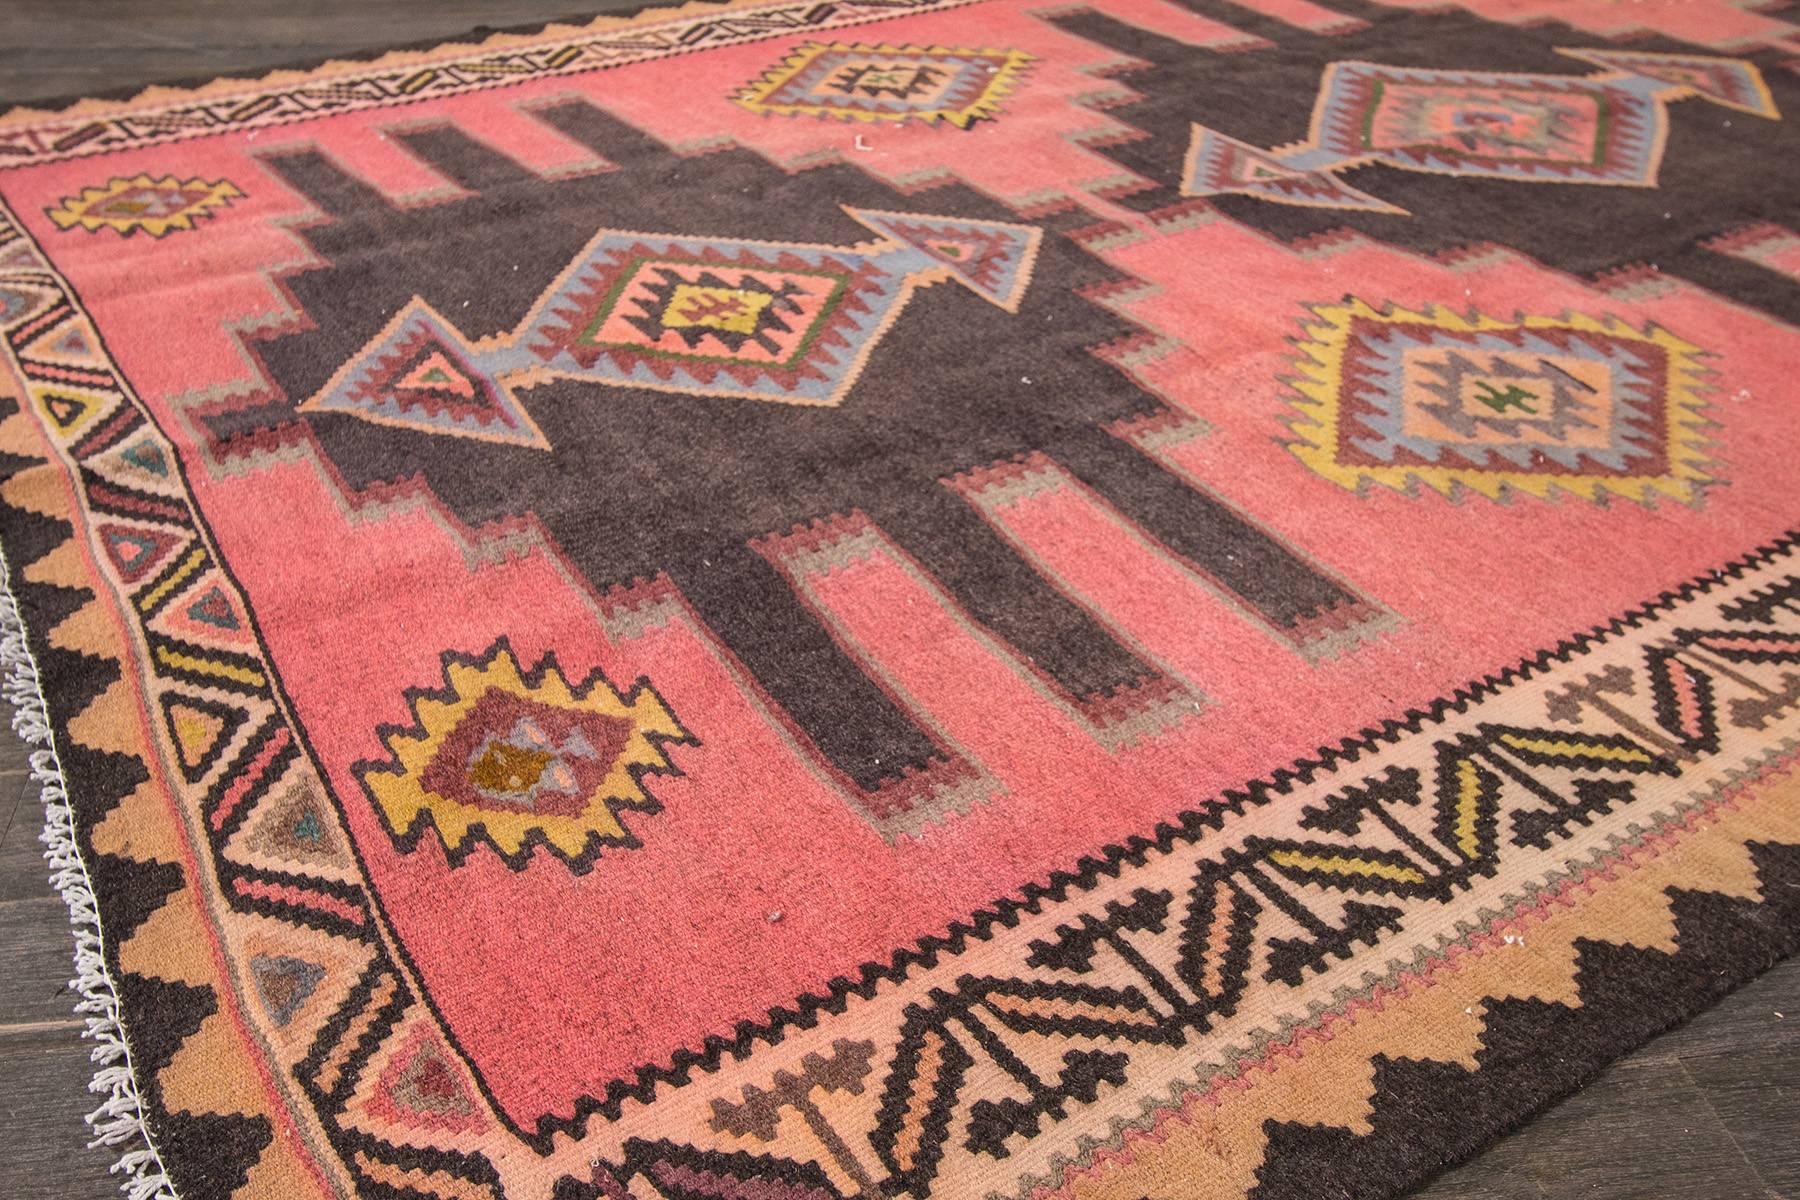 Wool Gorgeously Contrasted Persian Kilim Rug